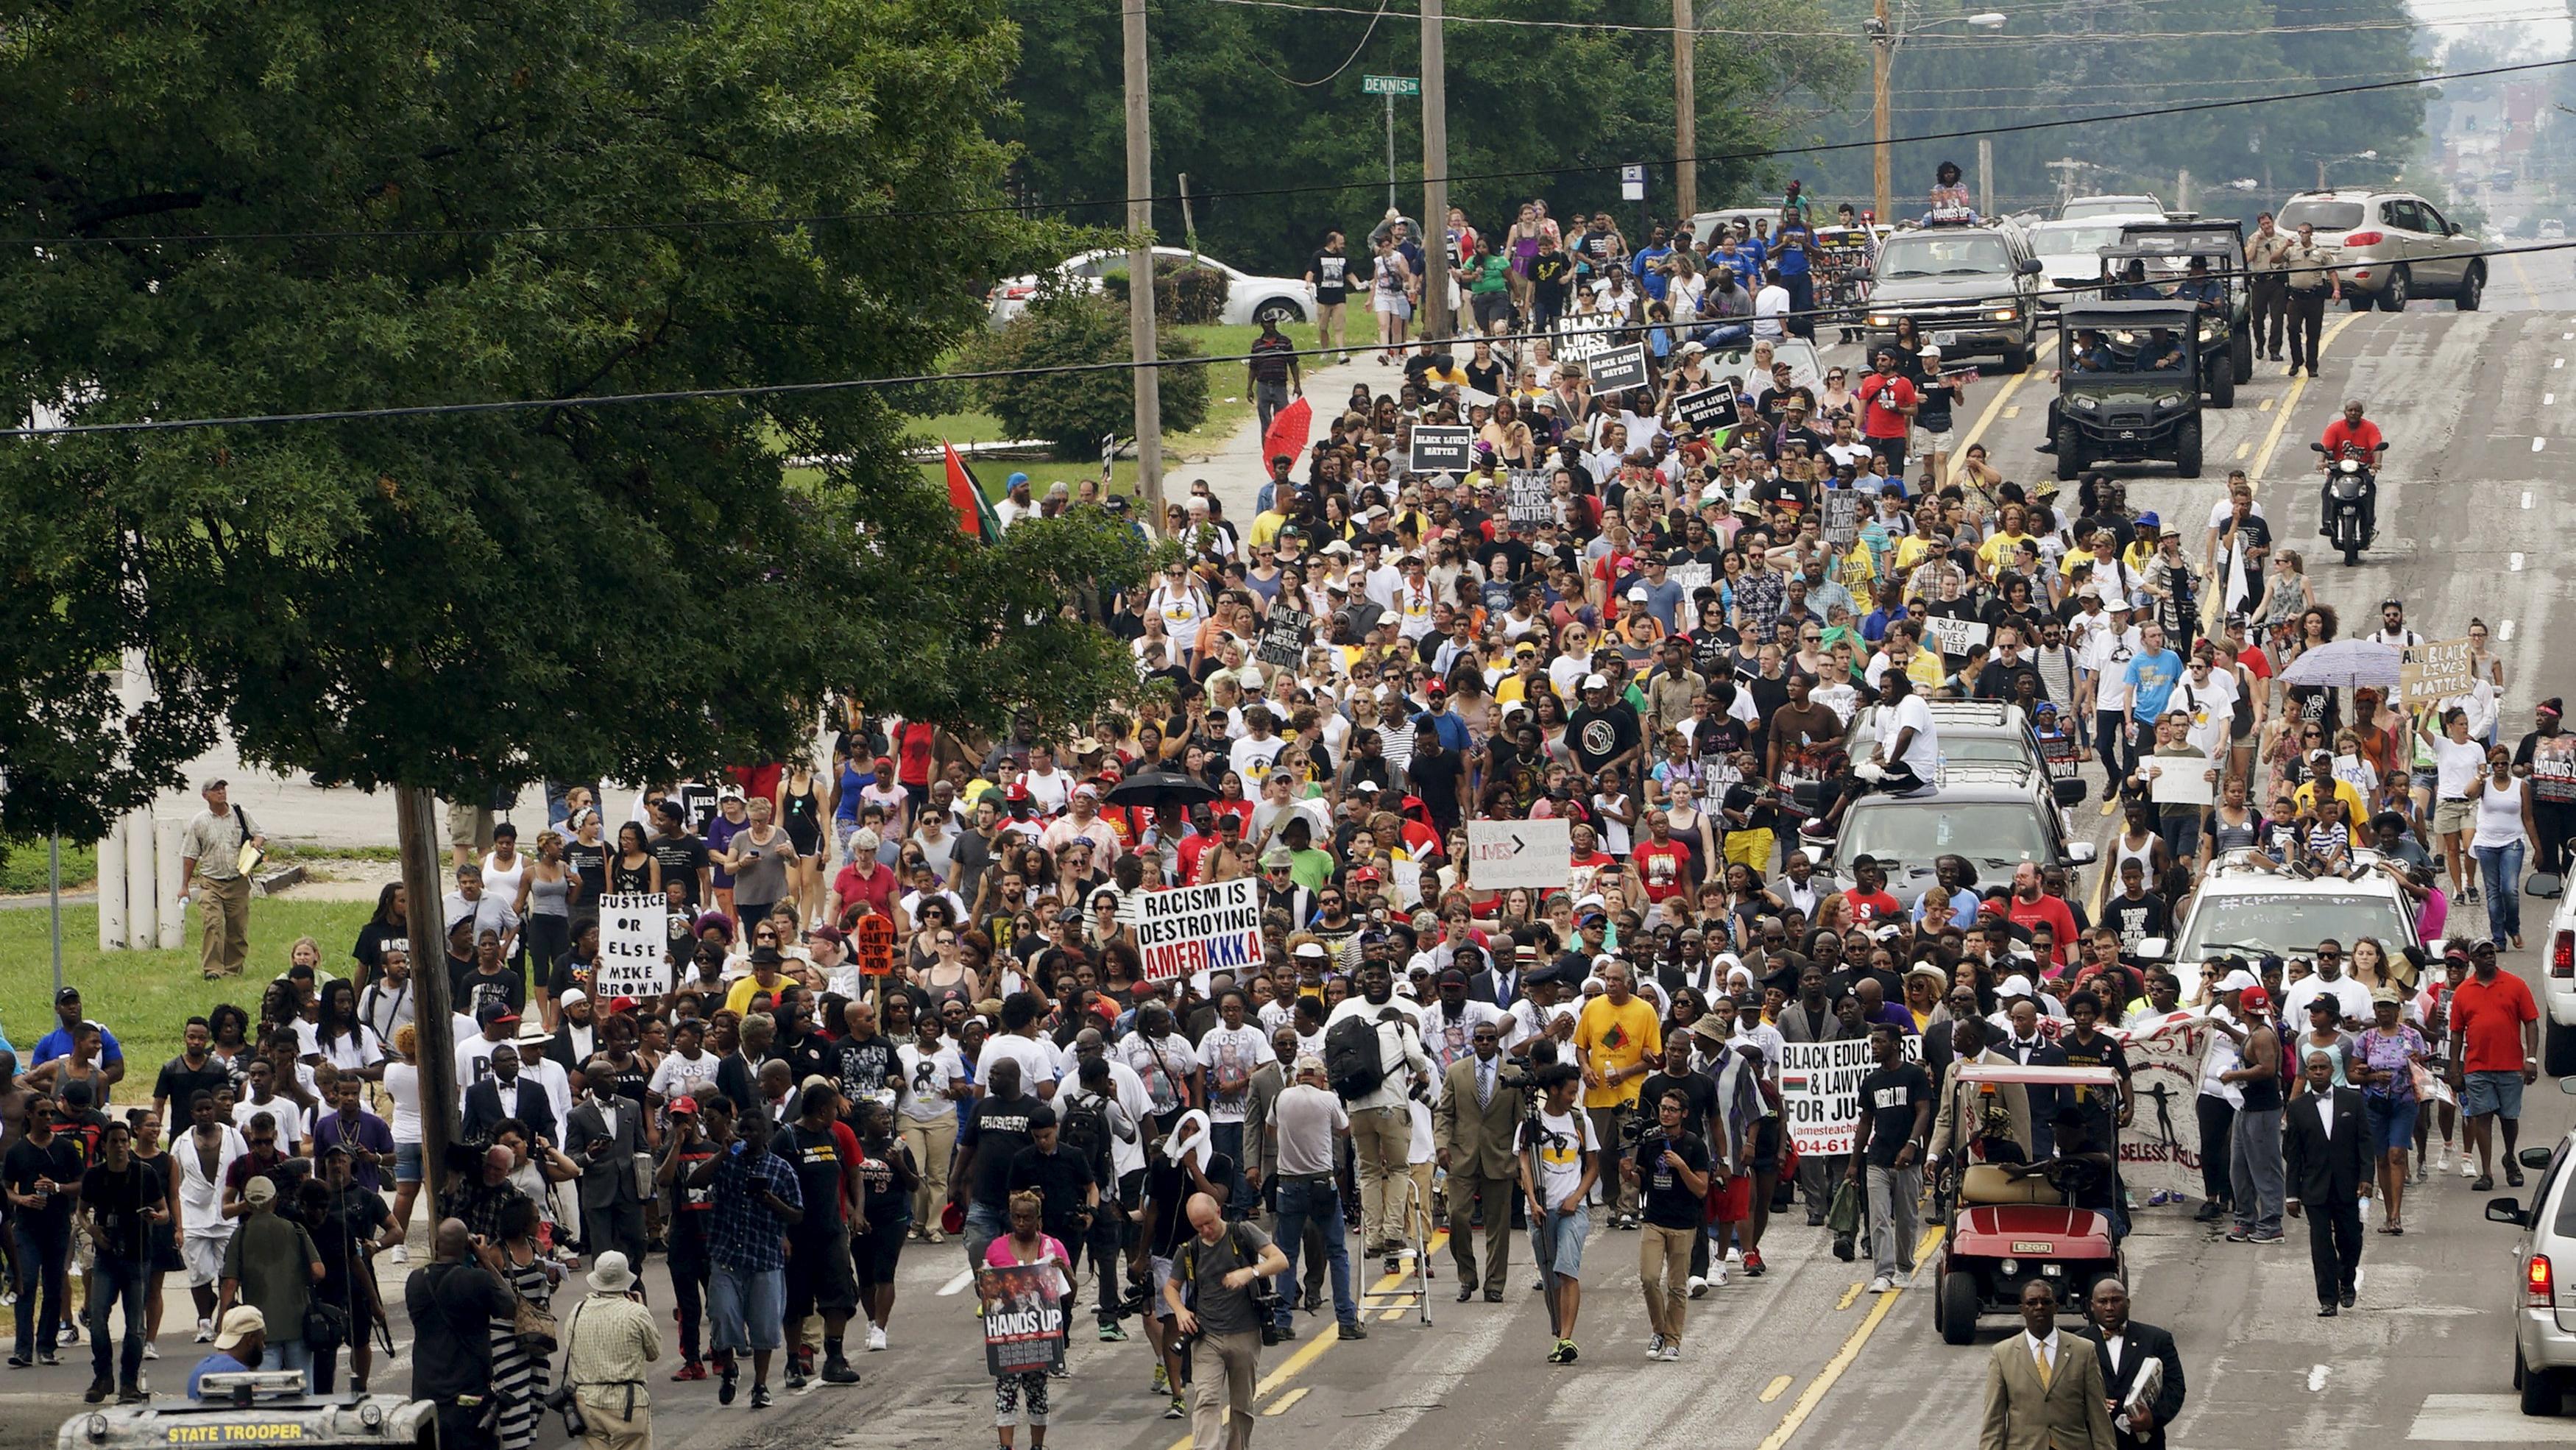 A protest march led by Michael Brown Sr. walks the streets to mark the one year anniversary of the killing of son Michael Brown Jr. in Ferguson, Missouri Sunday.